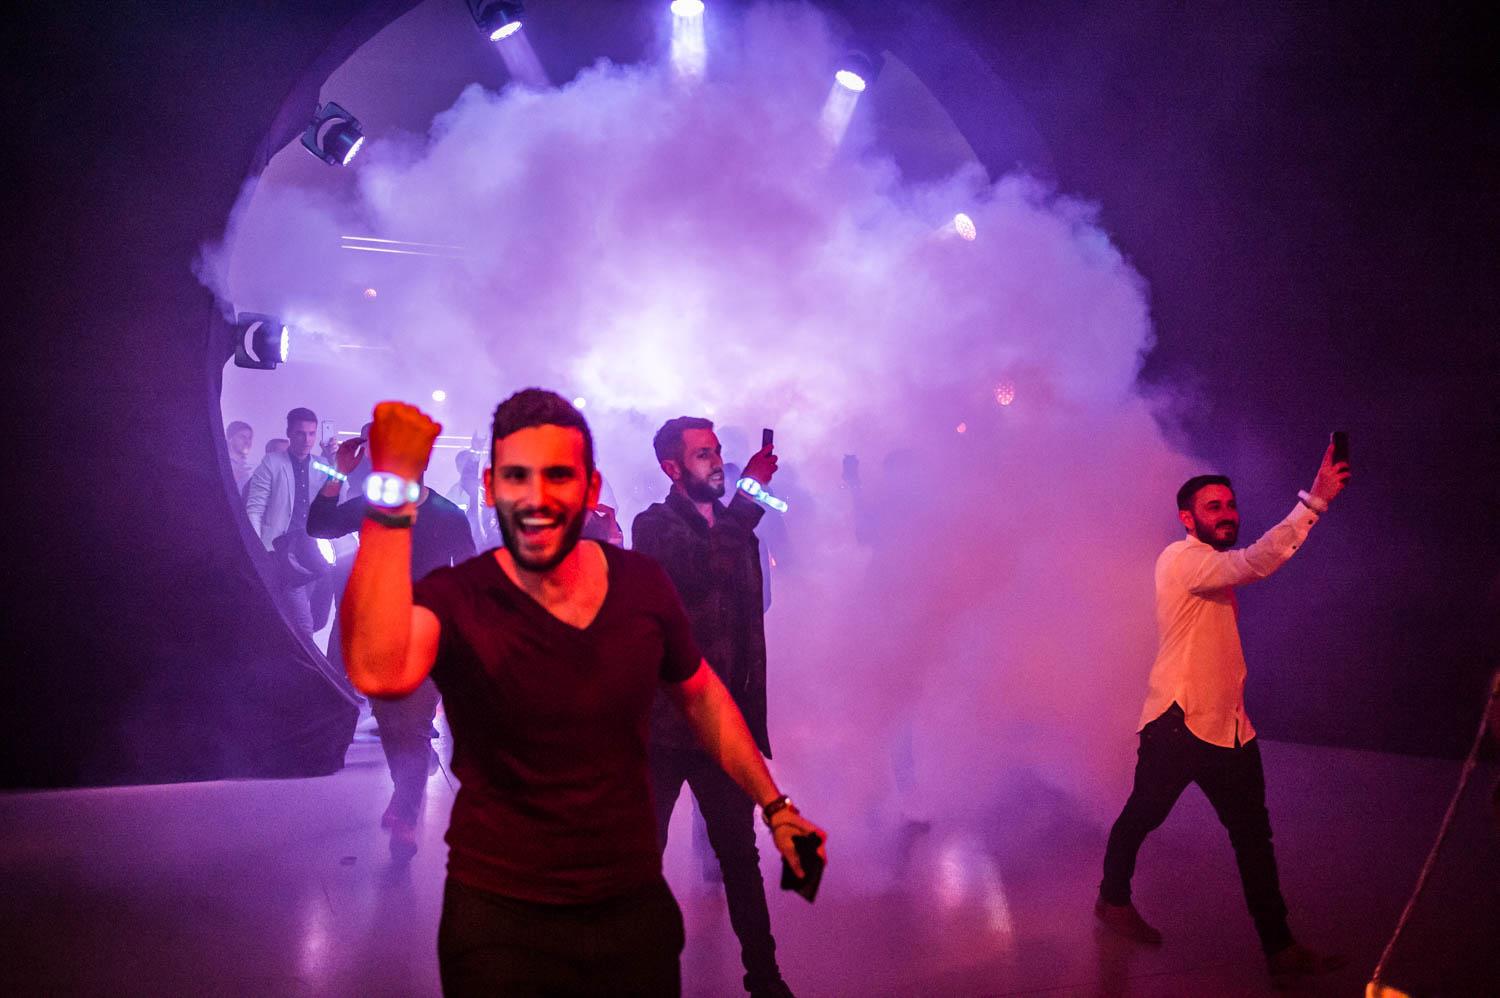 A group of party-goers emerges through a cloud of fog. A man faces the camera showing off his glowing wristband and smiles with an open mouth. Other party goers walk while filming with their phones.